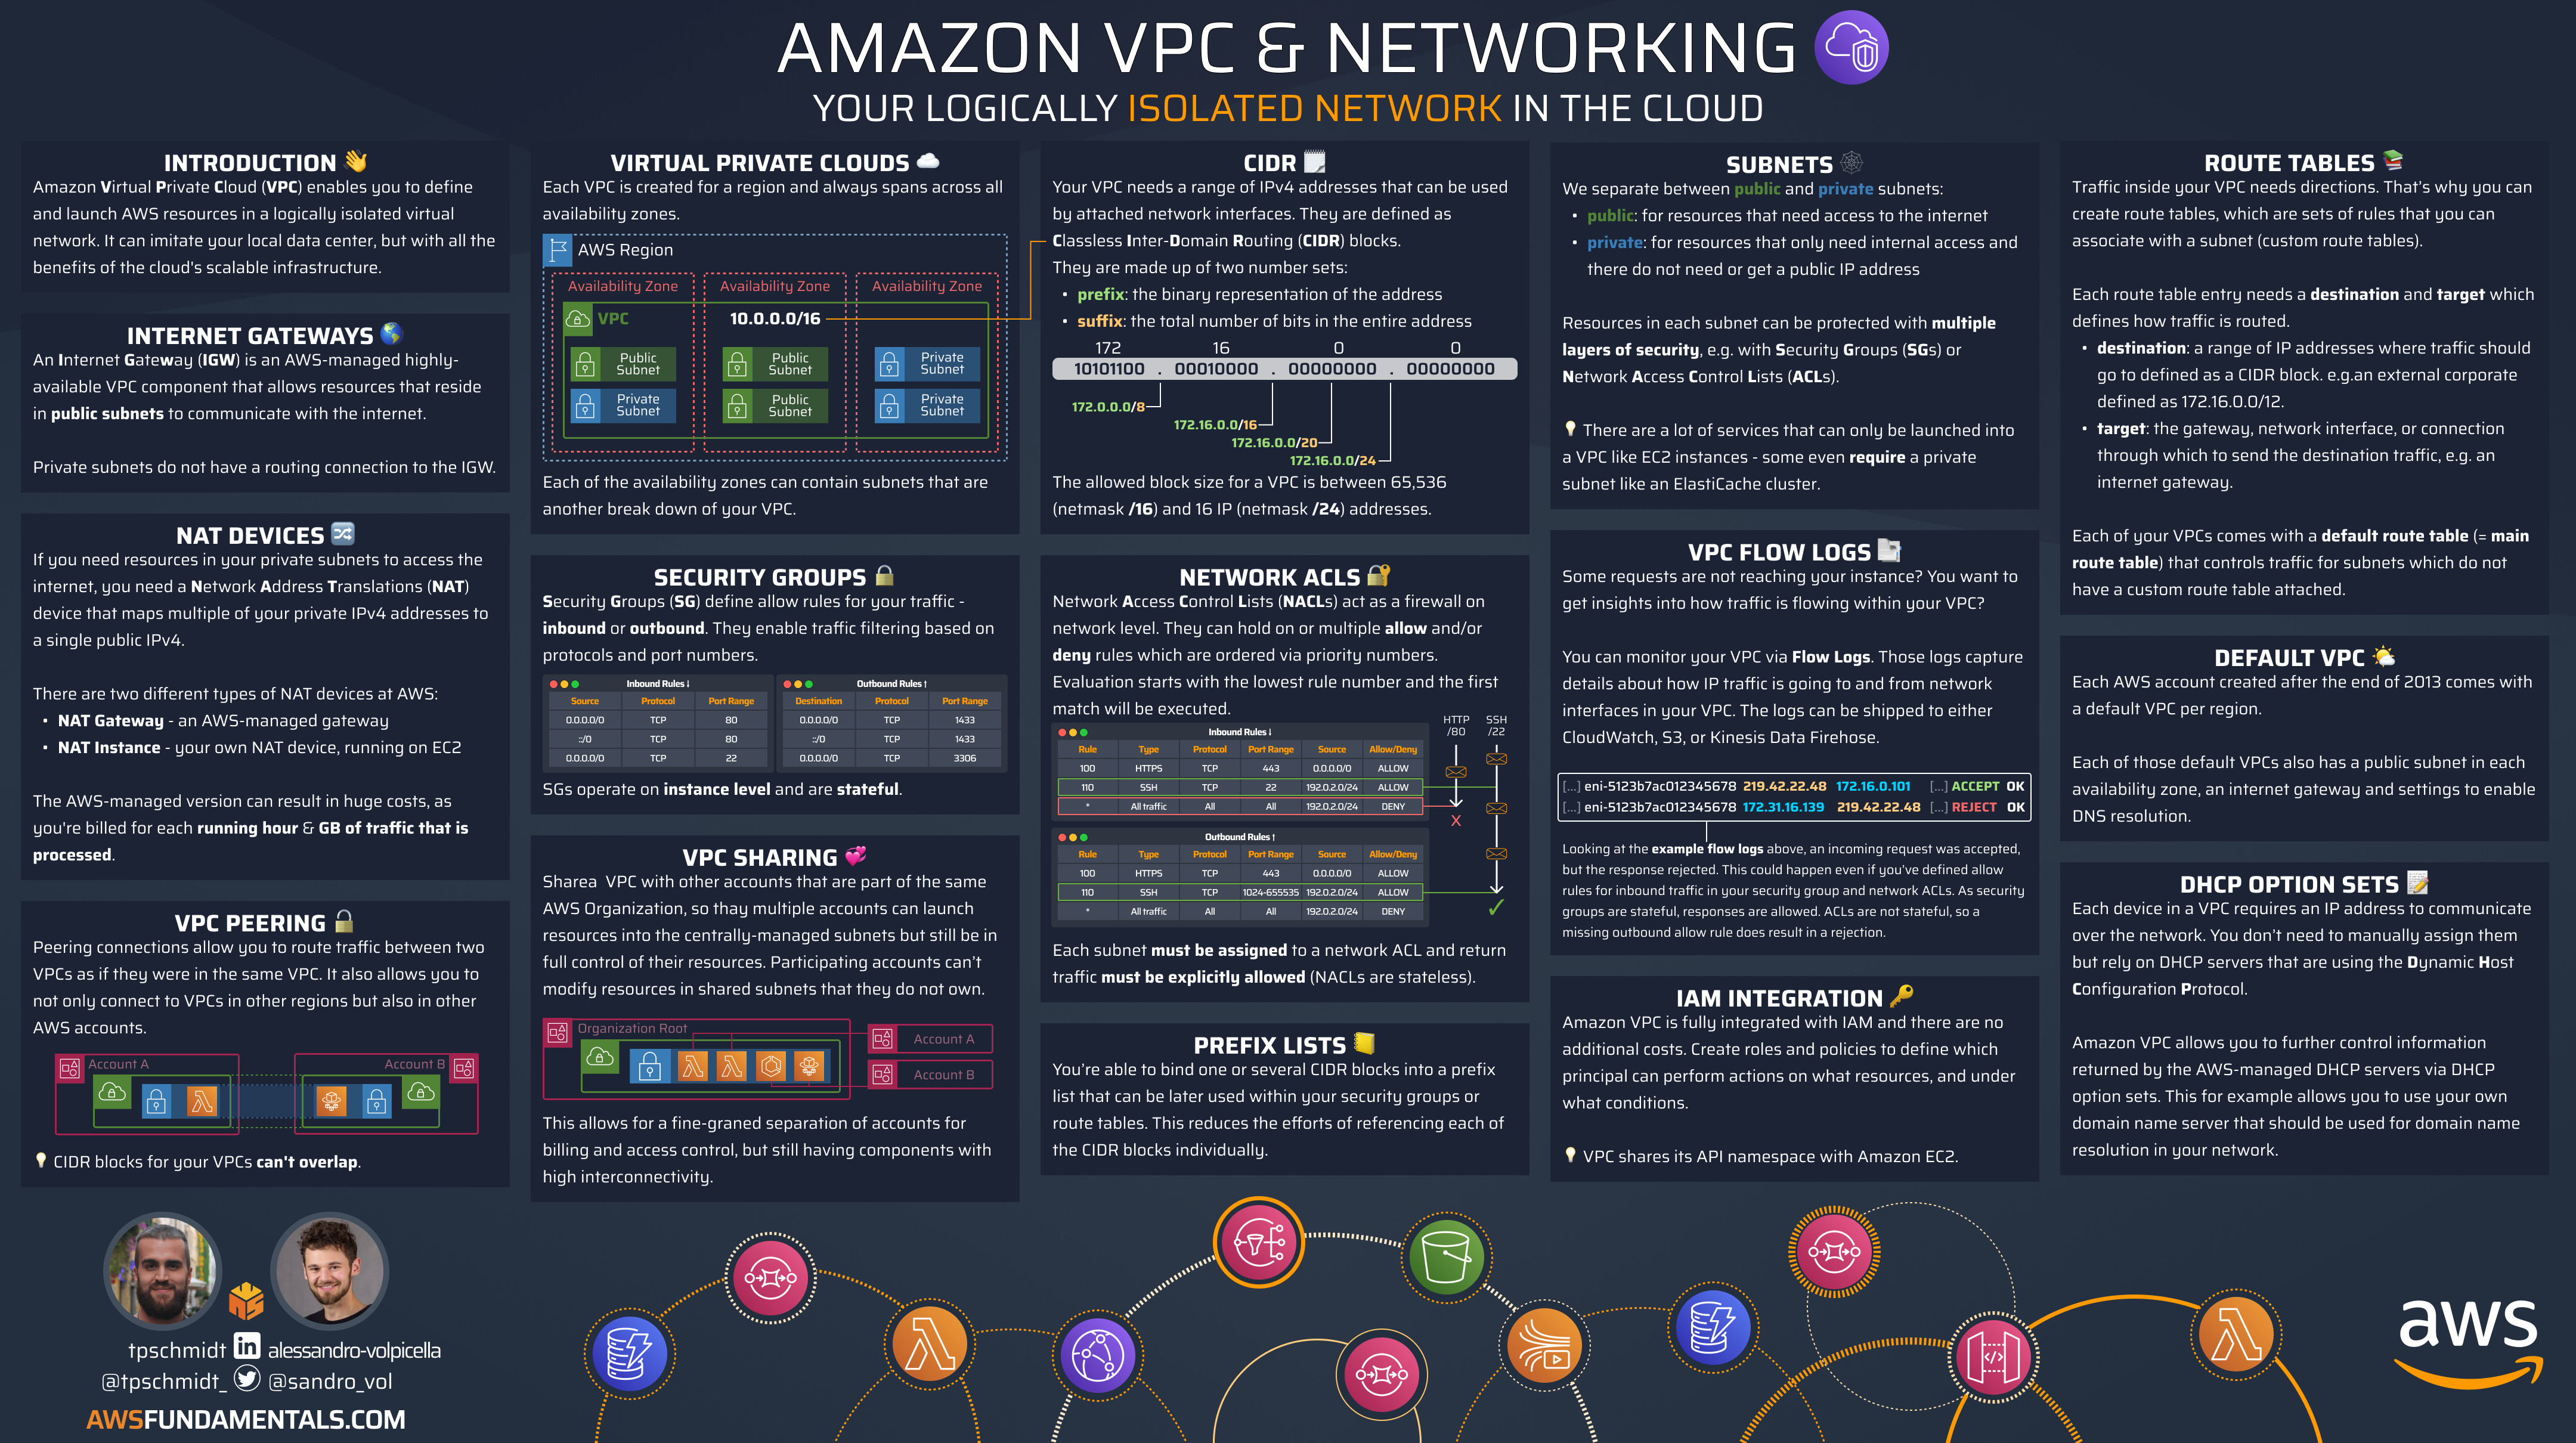 Amazon VPC and Networking